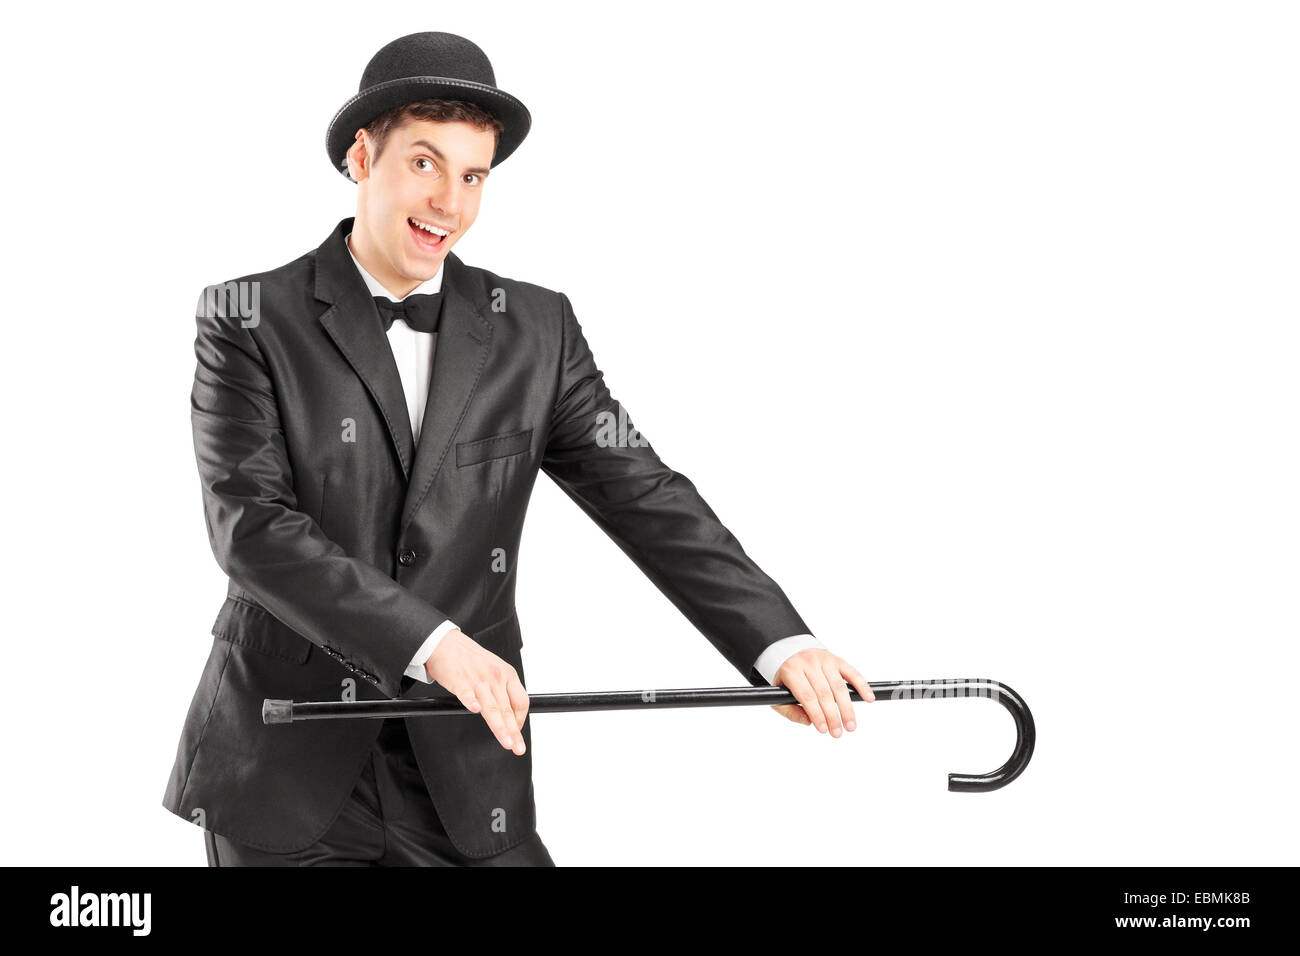 Male magician holding a cane isolated on white background Stock Photo